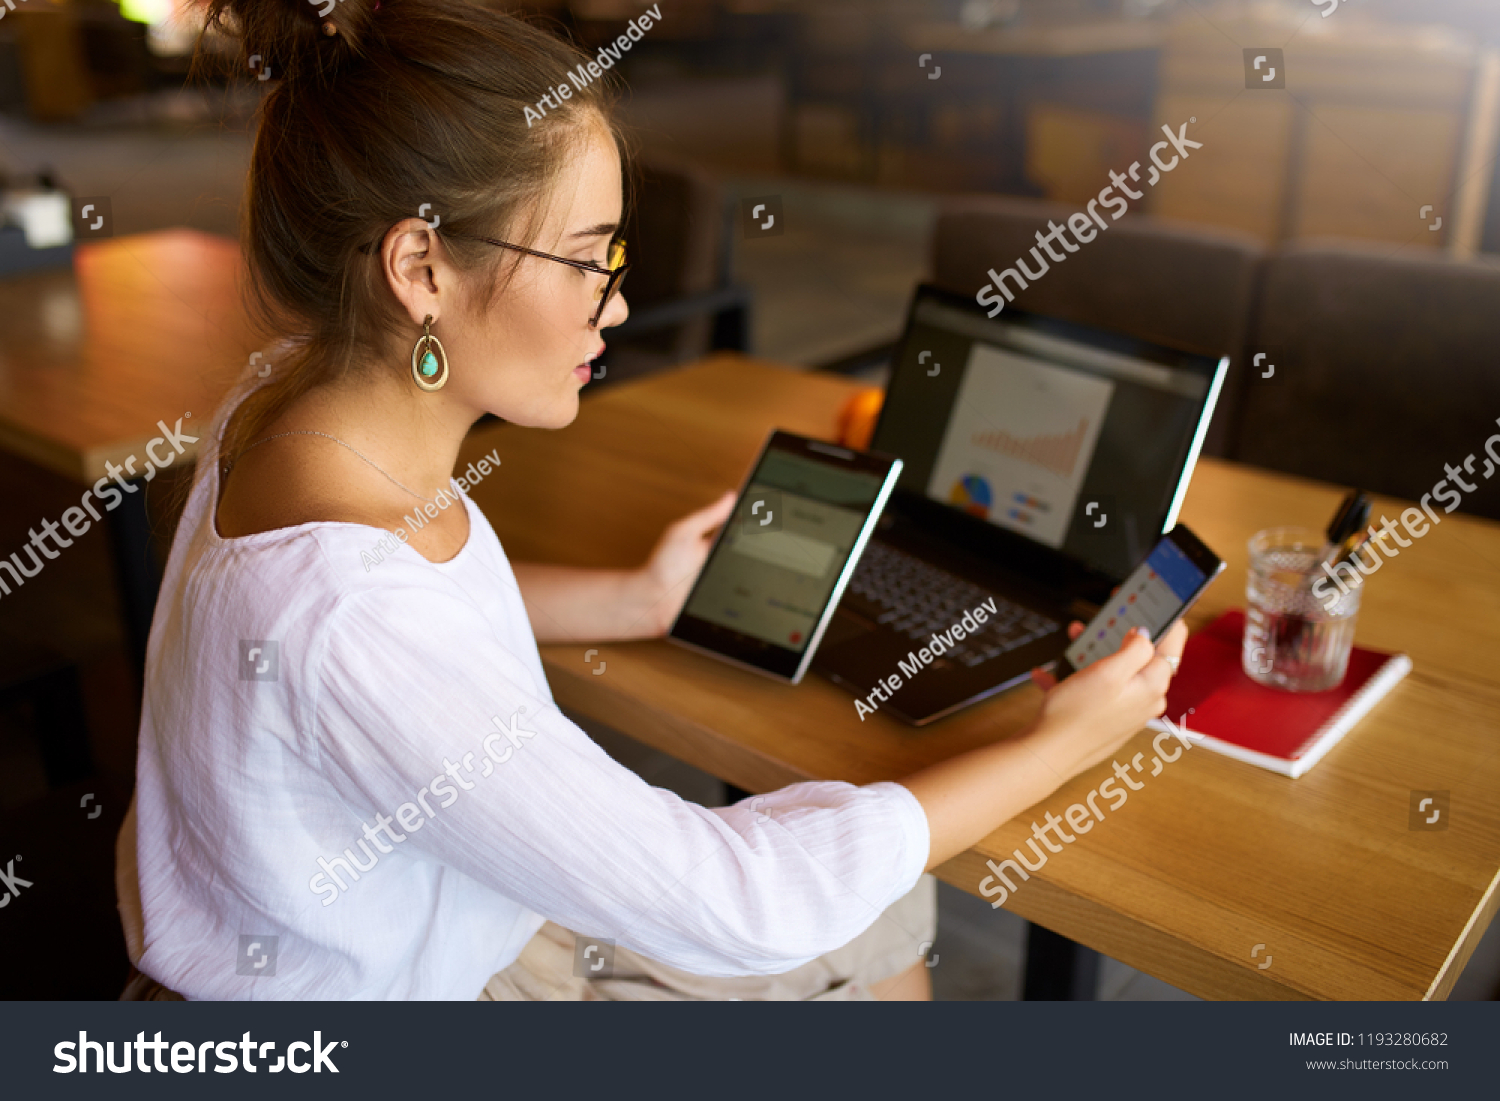 Mixed race woman in glasses working with multiple electronic internet devices. Freelancer businesswoman has tablet and cellphone in hands and laptop on table with charts on screen. Multitasking theme #1193280682